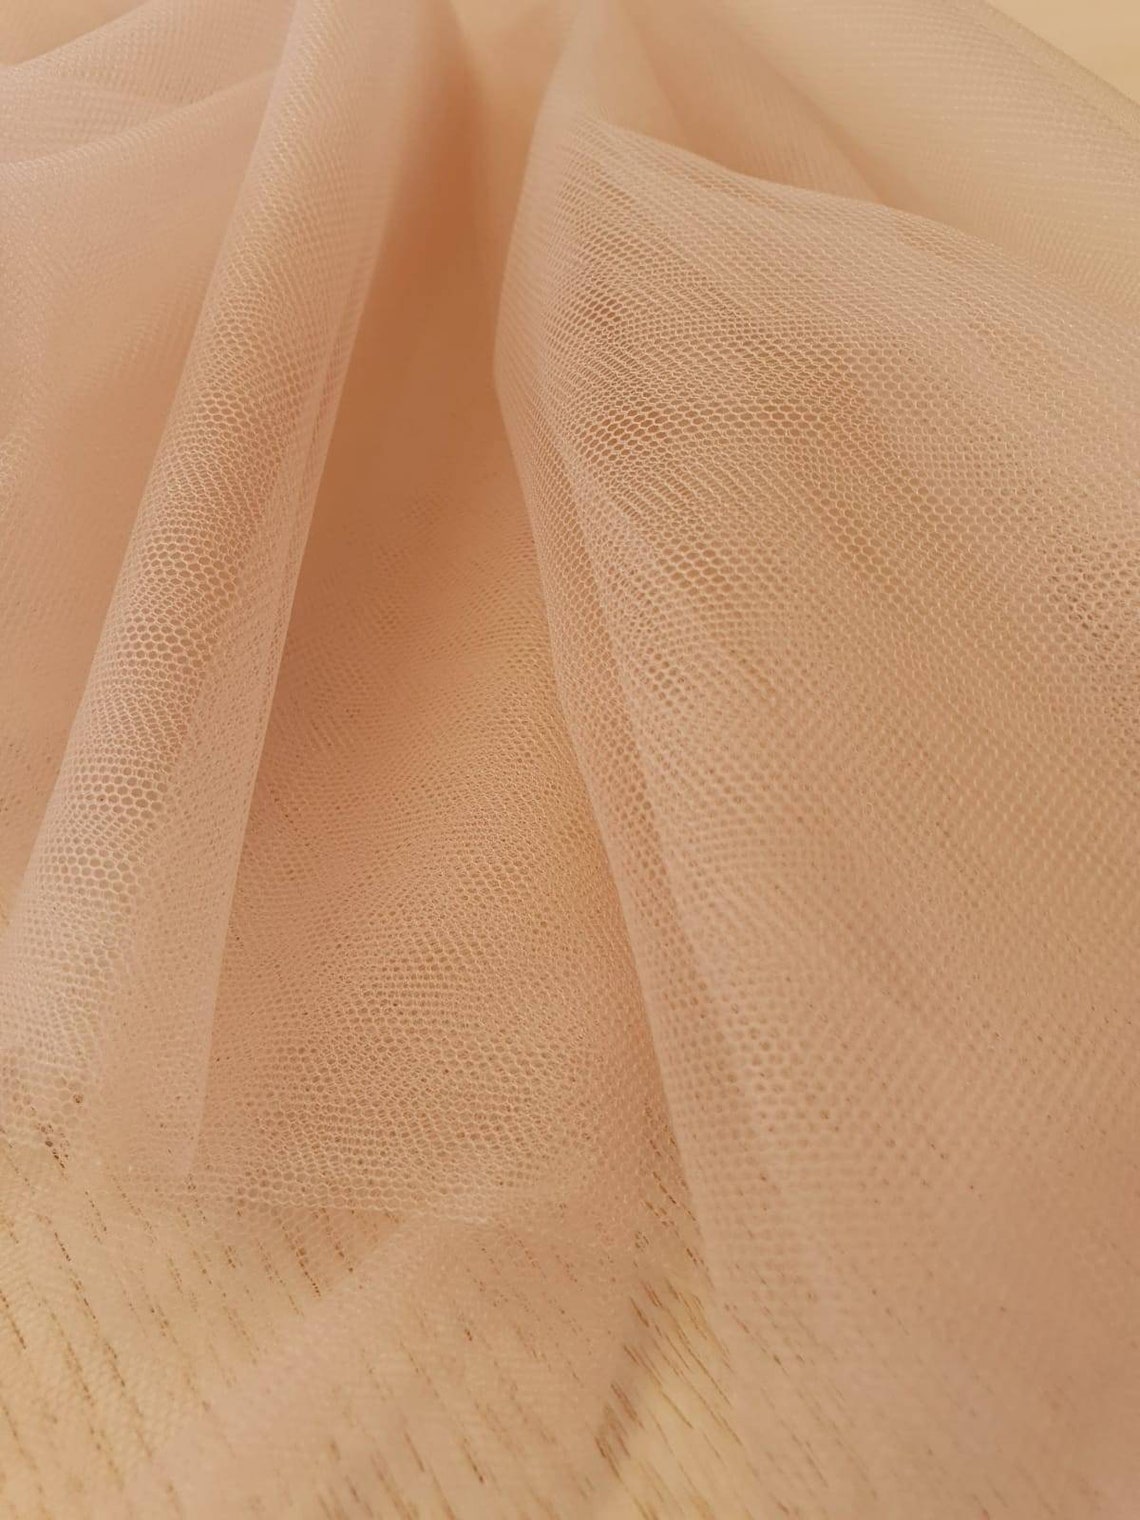 Nude Tulle Fabric Lingerie Beige Net Skin Color Fabric Etsy